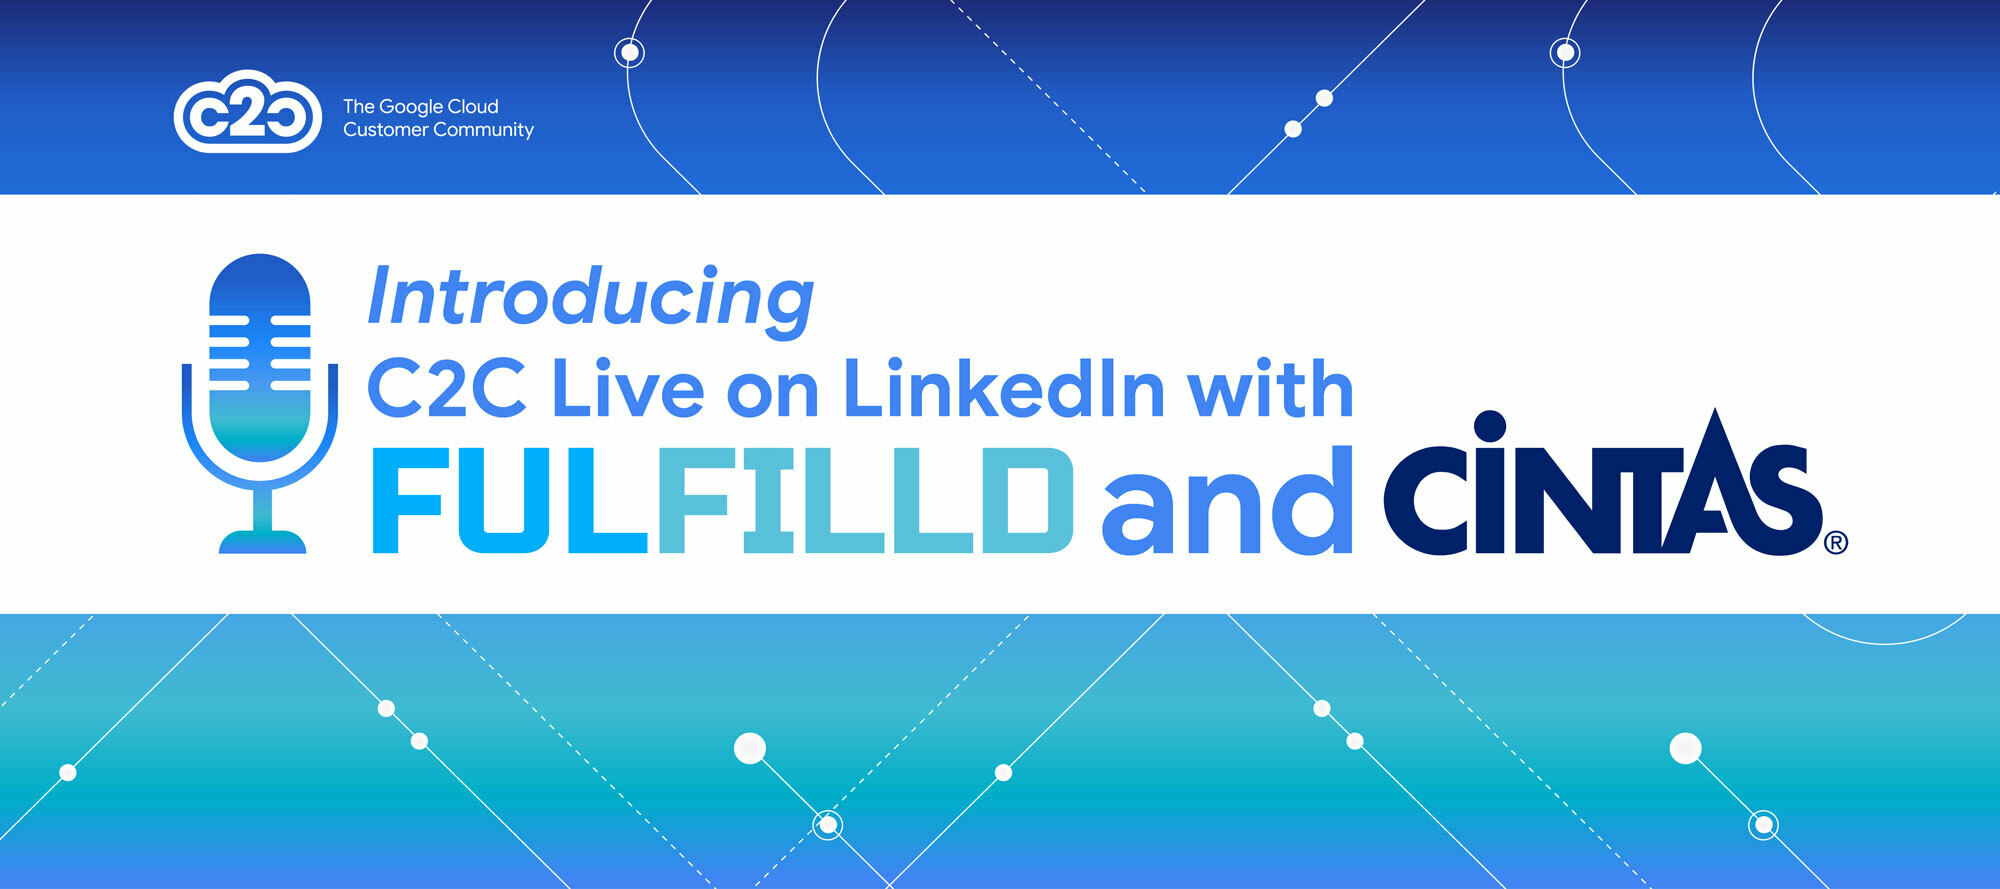 Introducing C2C Live on LinkedIn with Fulfilld and Cintas